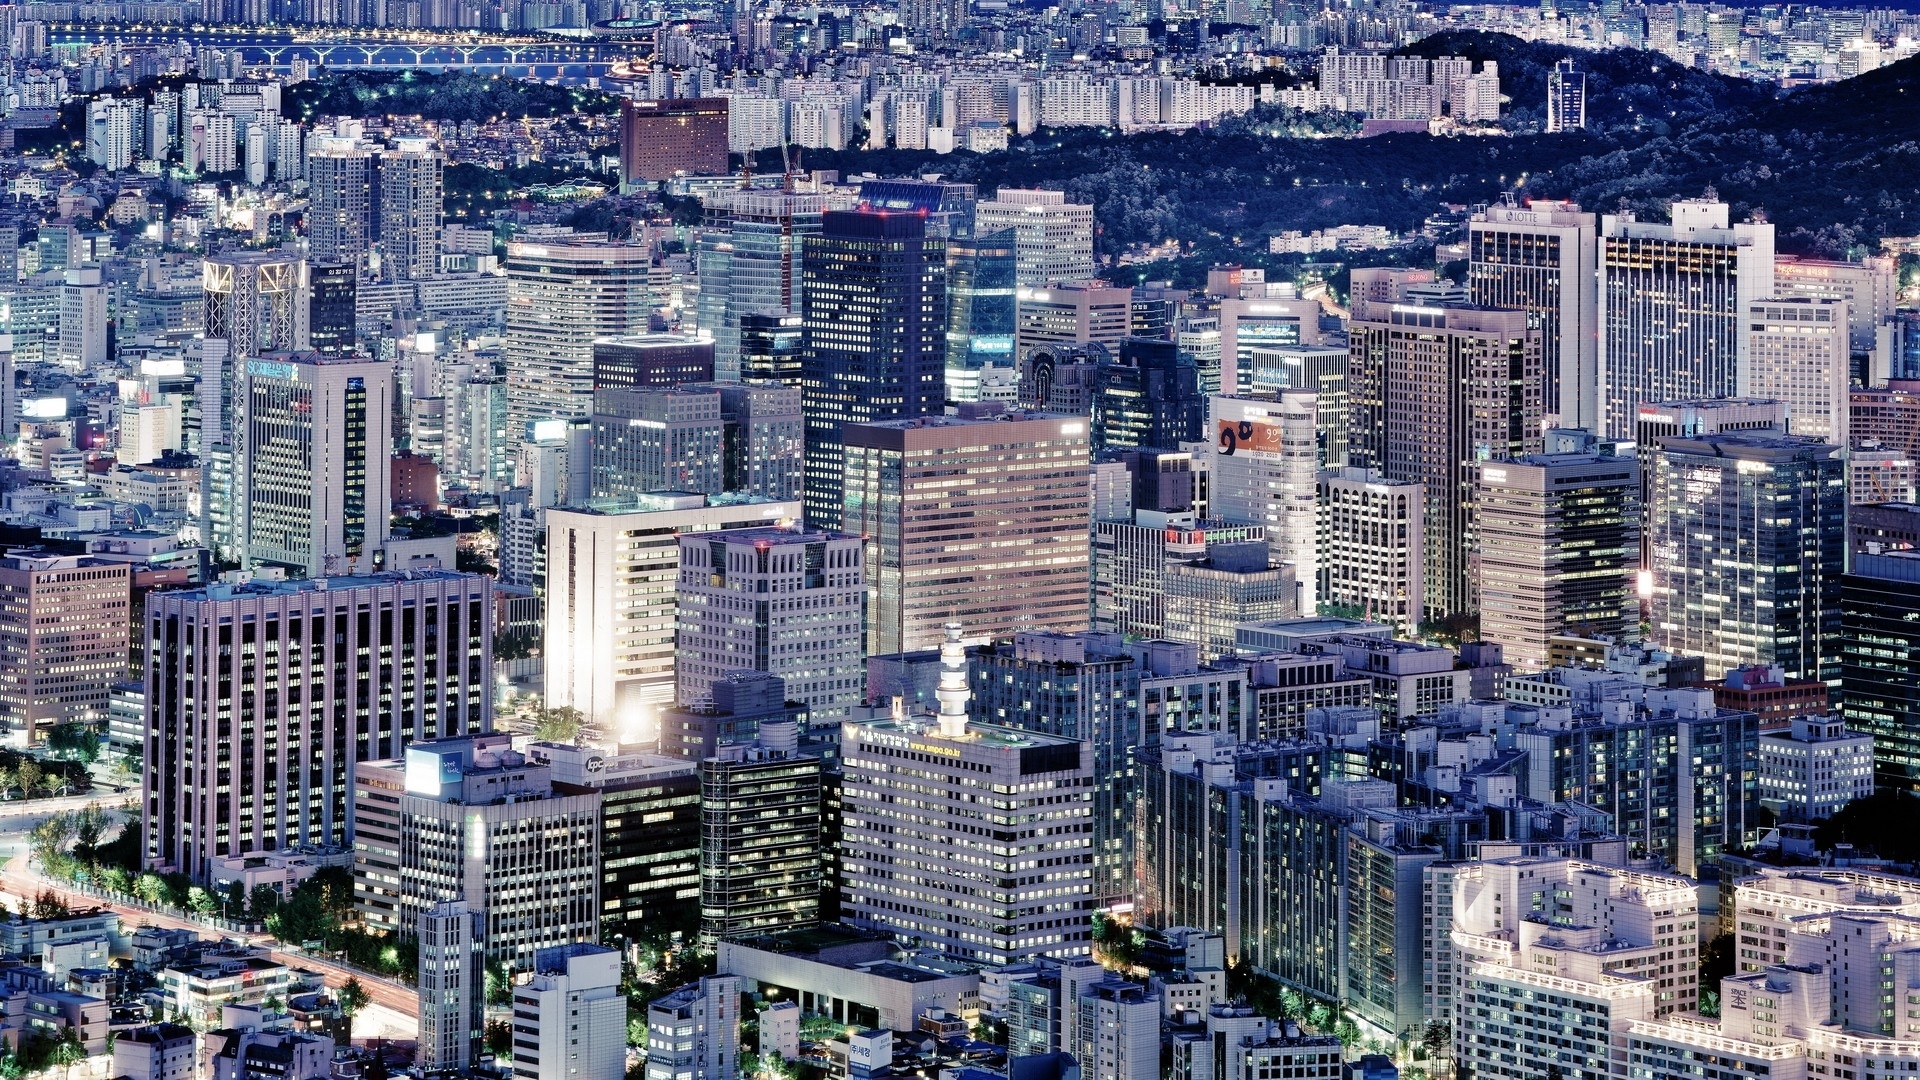 japan, Tokyo, Cityscapes, Skylines, Buildings, Skyscrapers, Asians, Asia, Asian, Architecture, Seoul, City Wallpaper